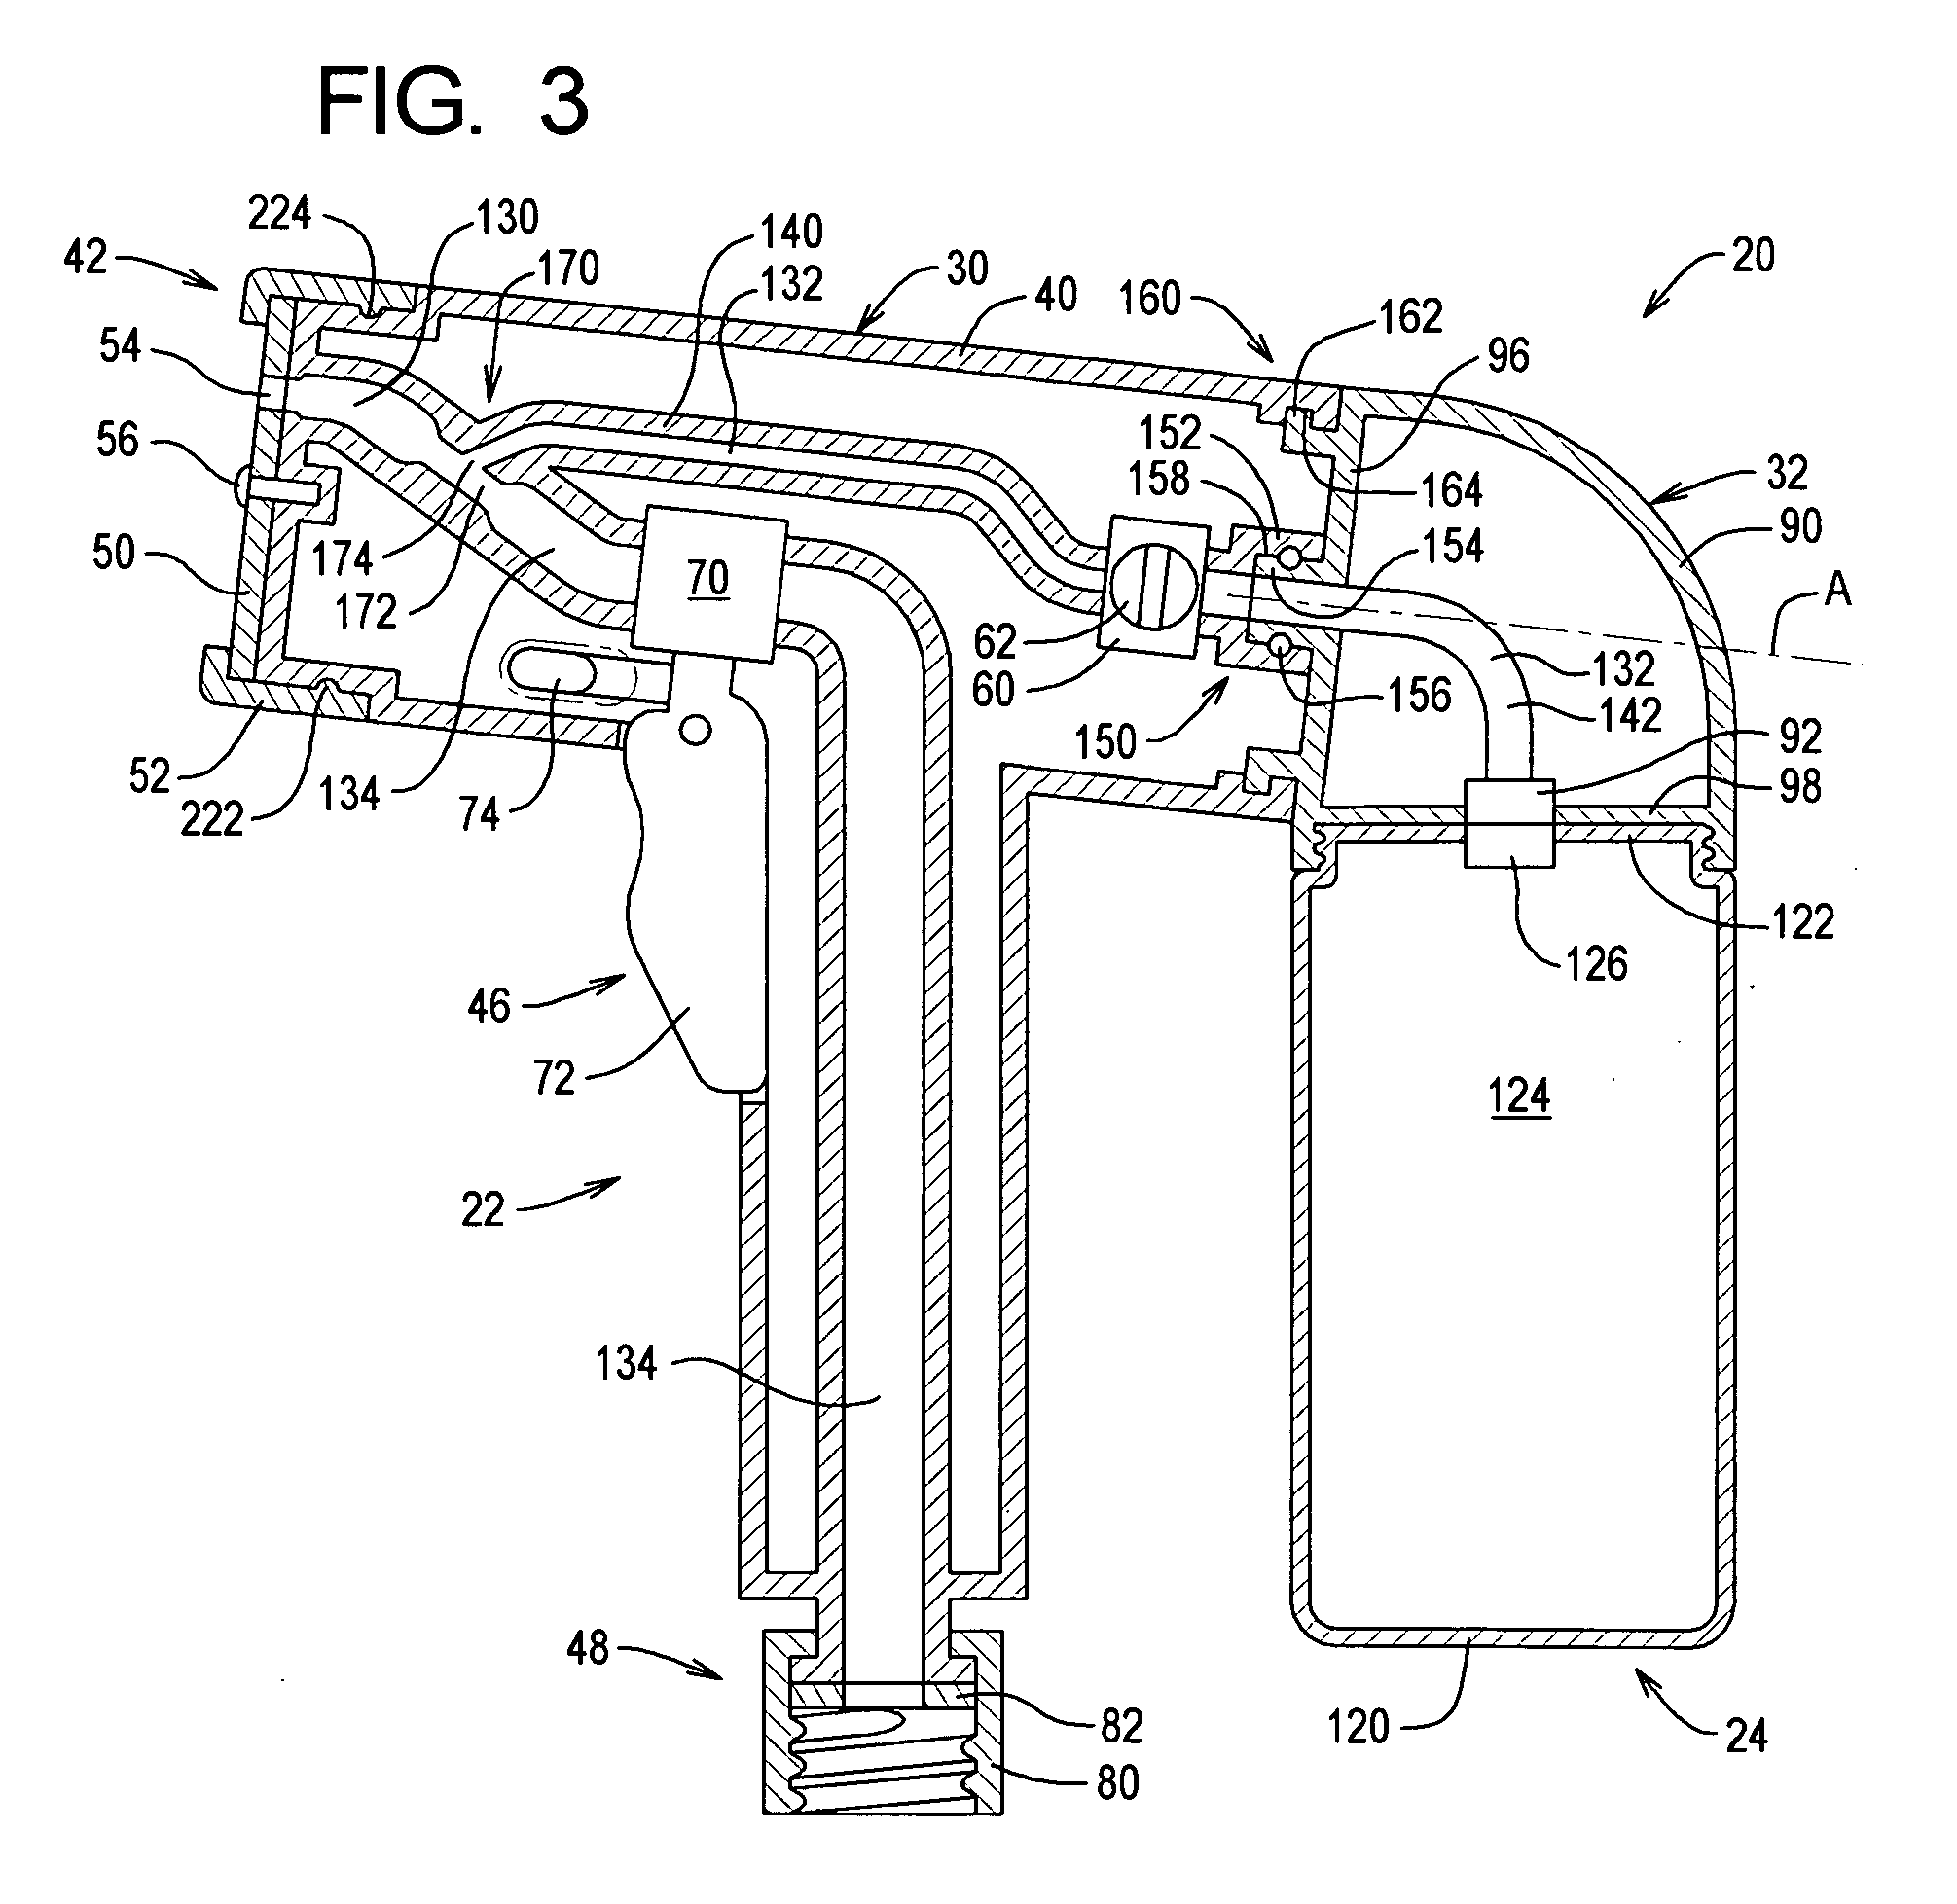 Systems and methods for spraying water and mixtures of water and other materials